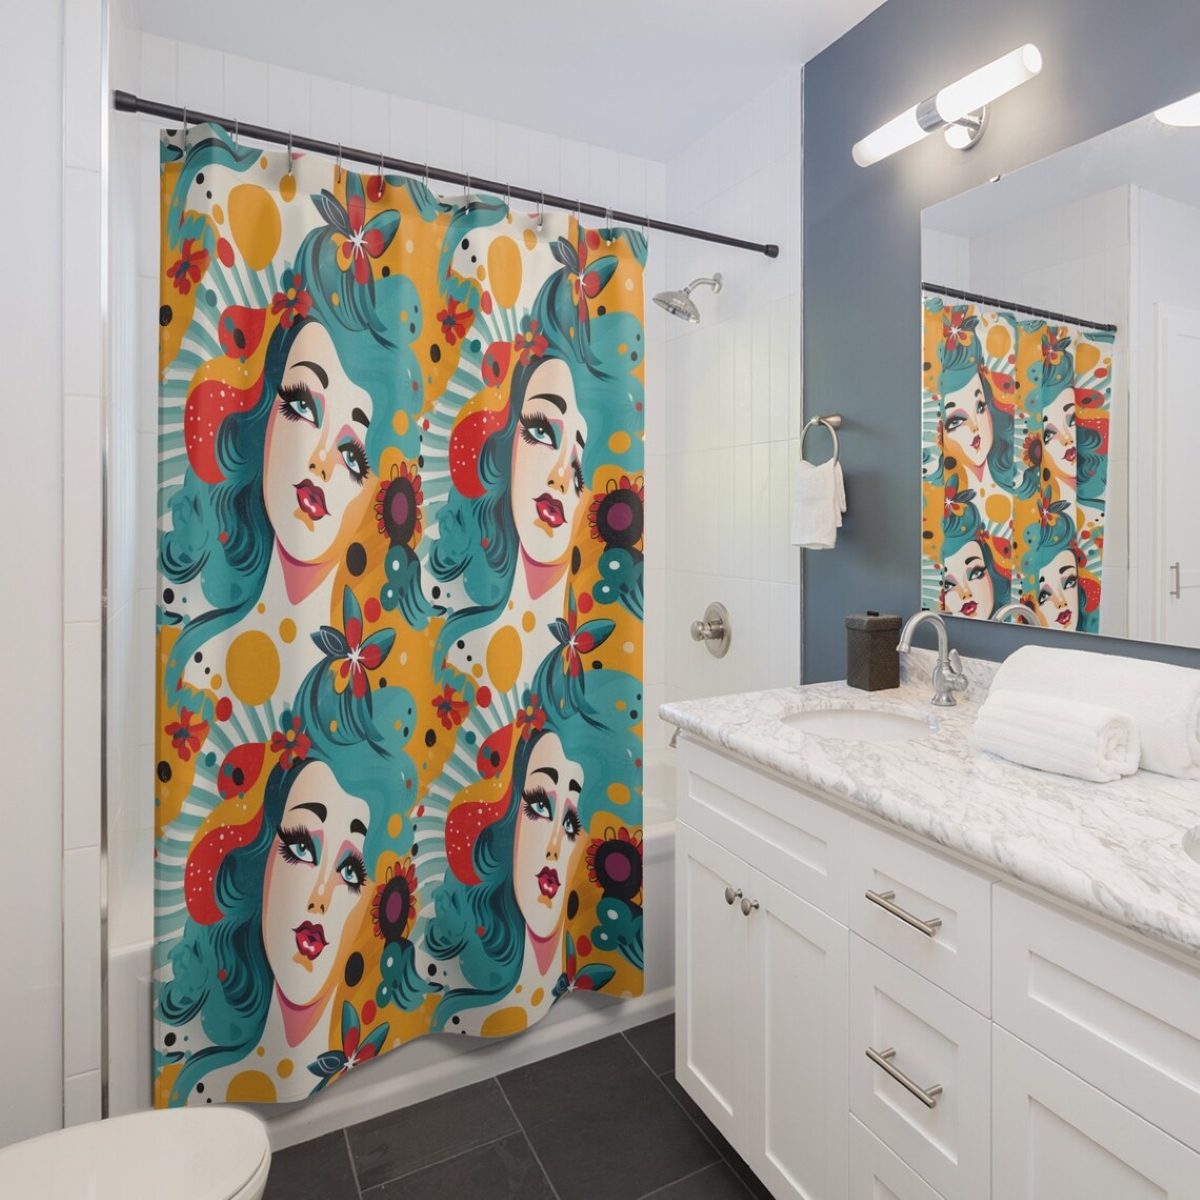 Bathroom with large graphic shower curtain.